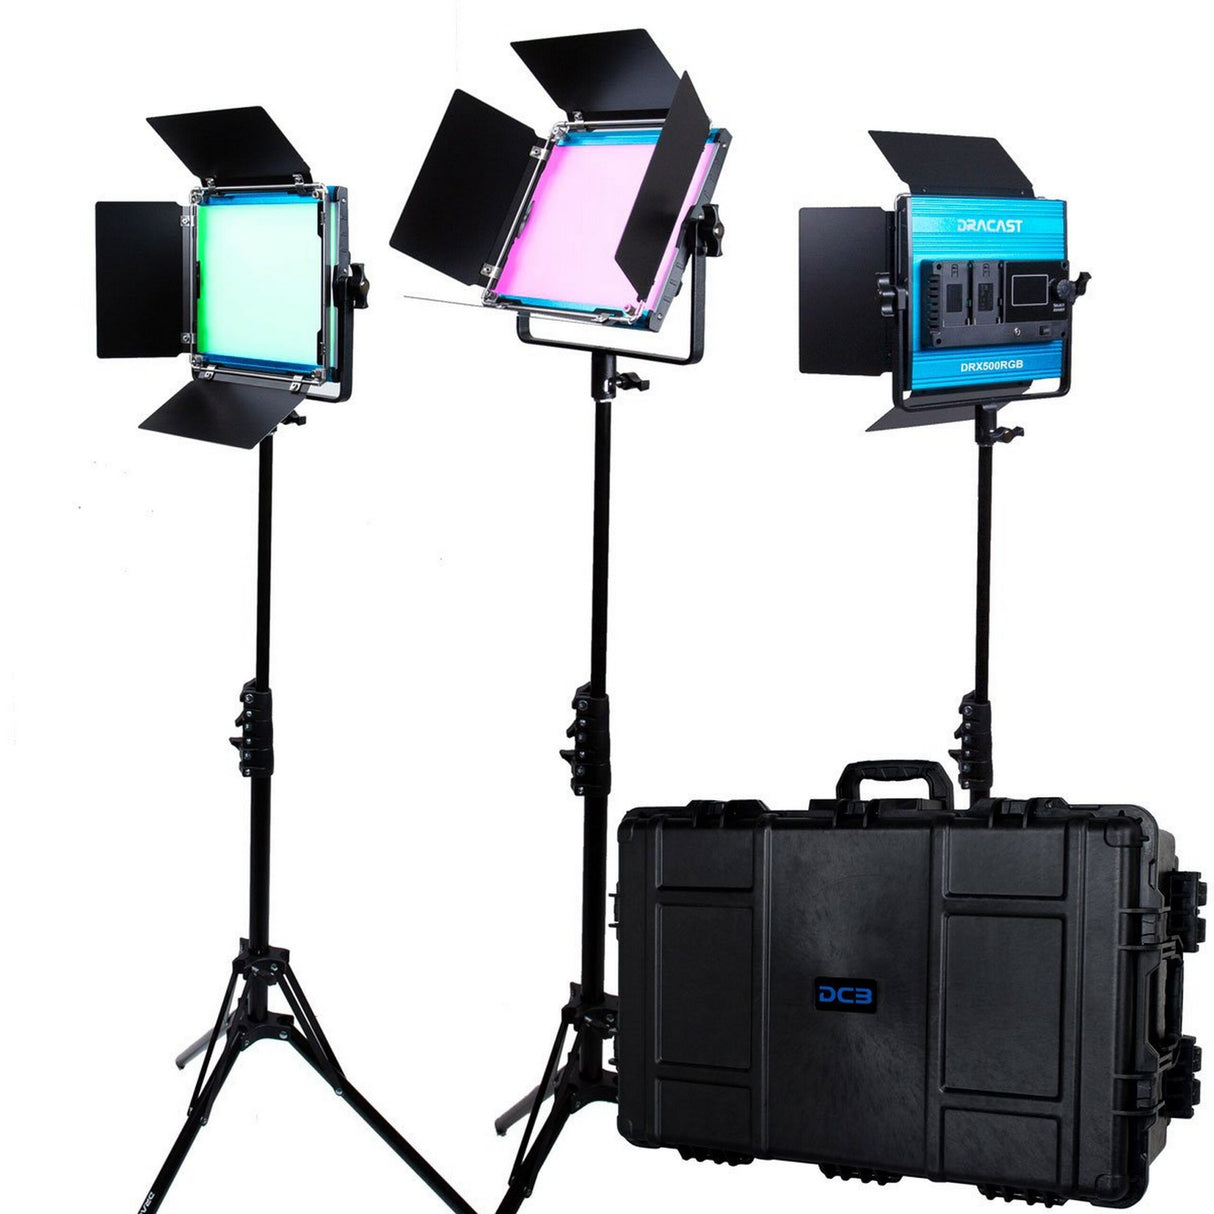 Dracast DRX3500RGBH LED500 X Series RGB and Bi-Color LED 3 Light Kit with Injection Molded Travel Case